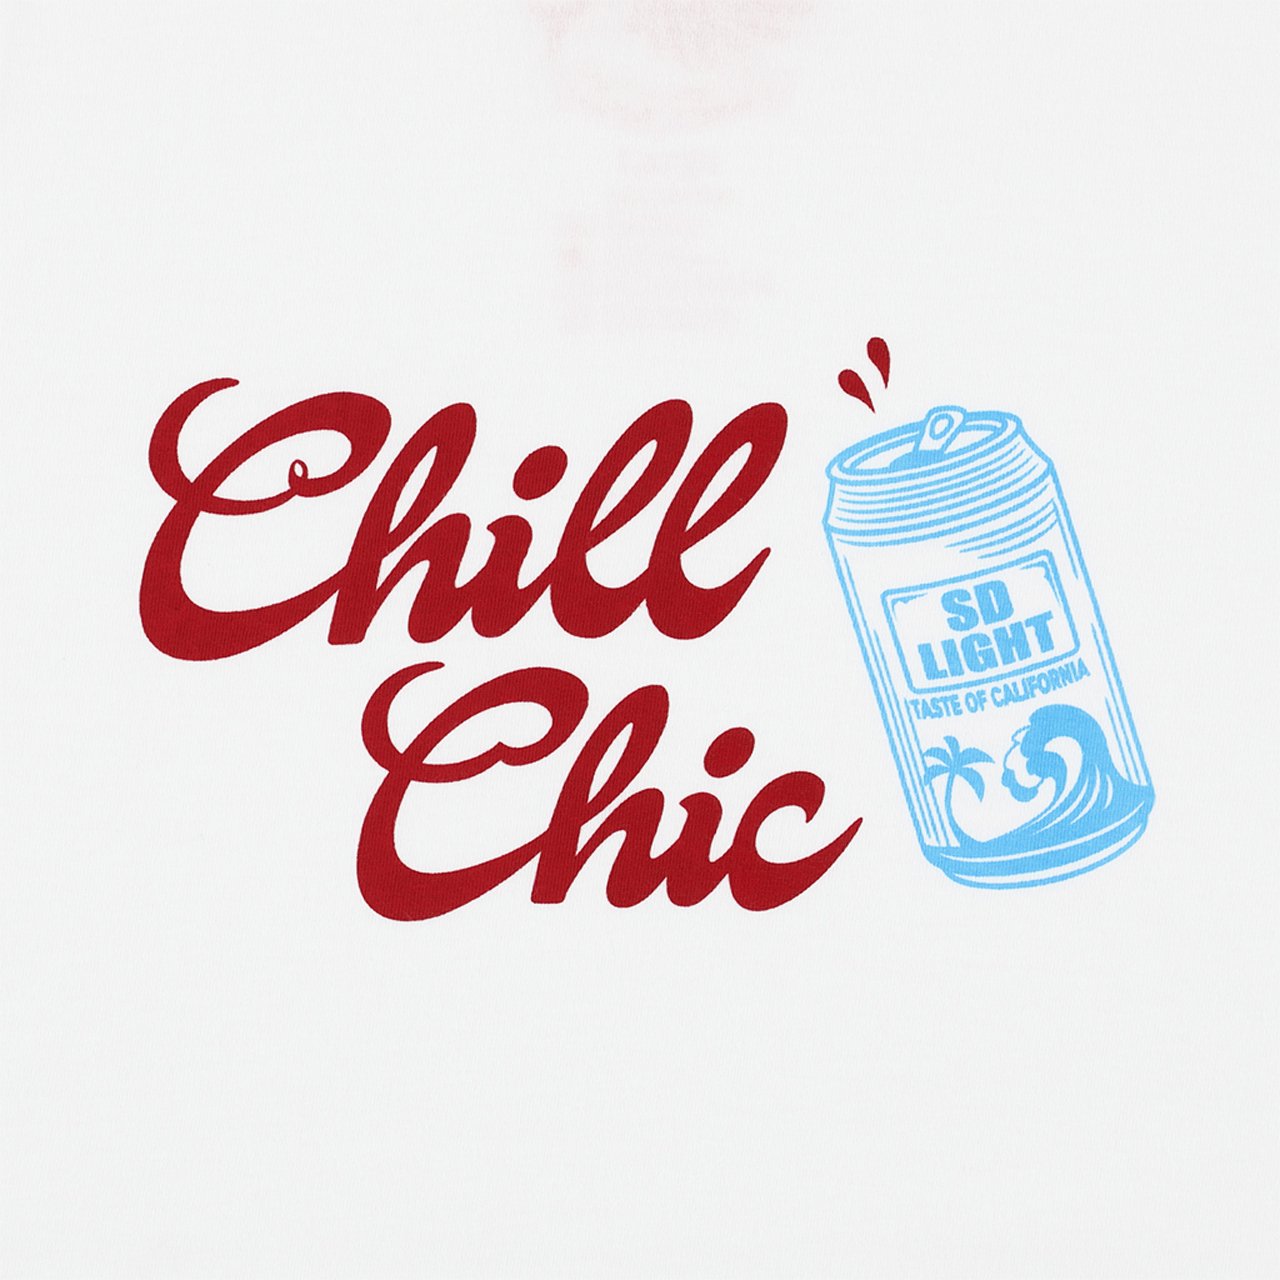 <img class='new_mark_img1' src='https://img.shop-pro.jp/img/new/icons5.gif' style='border:none;display:inline;margin:0px;padding:0px;width:auto;' />STANDARD CALIFORNIA ( ե˥)Chill Chic Tee White